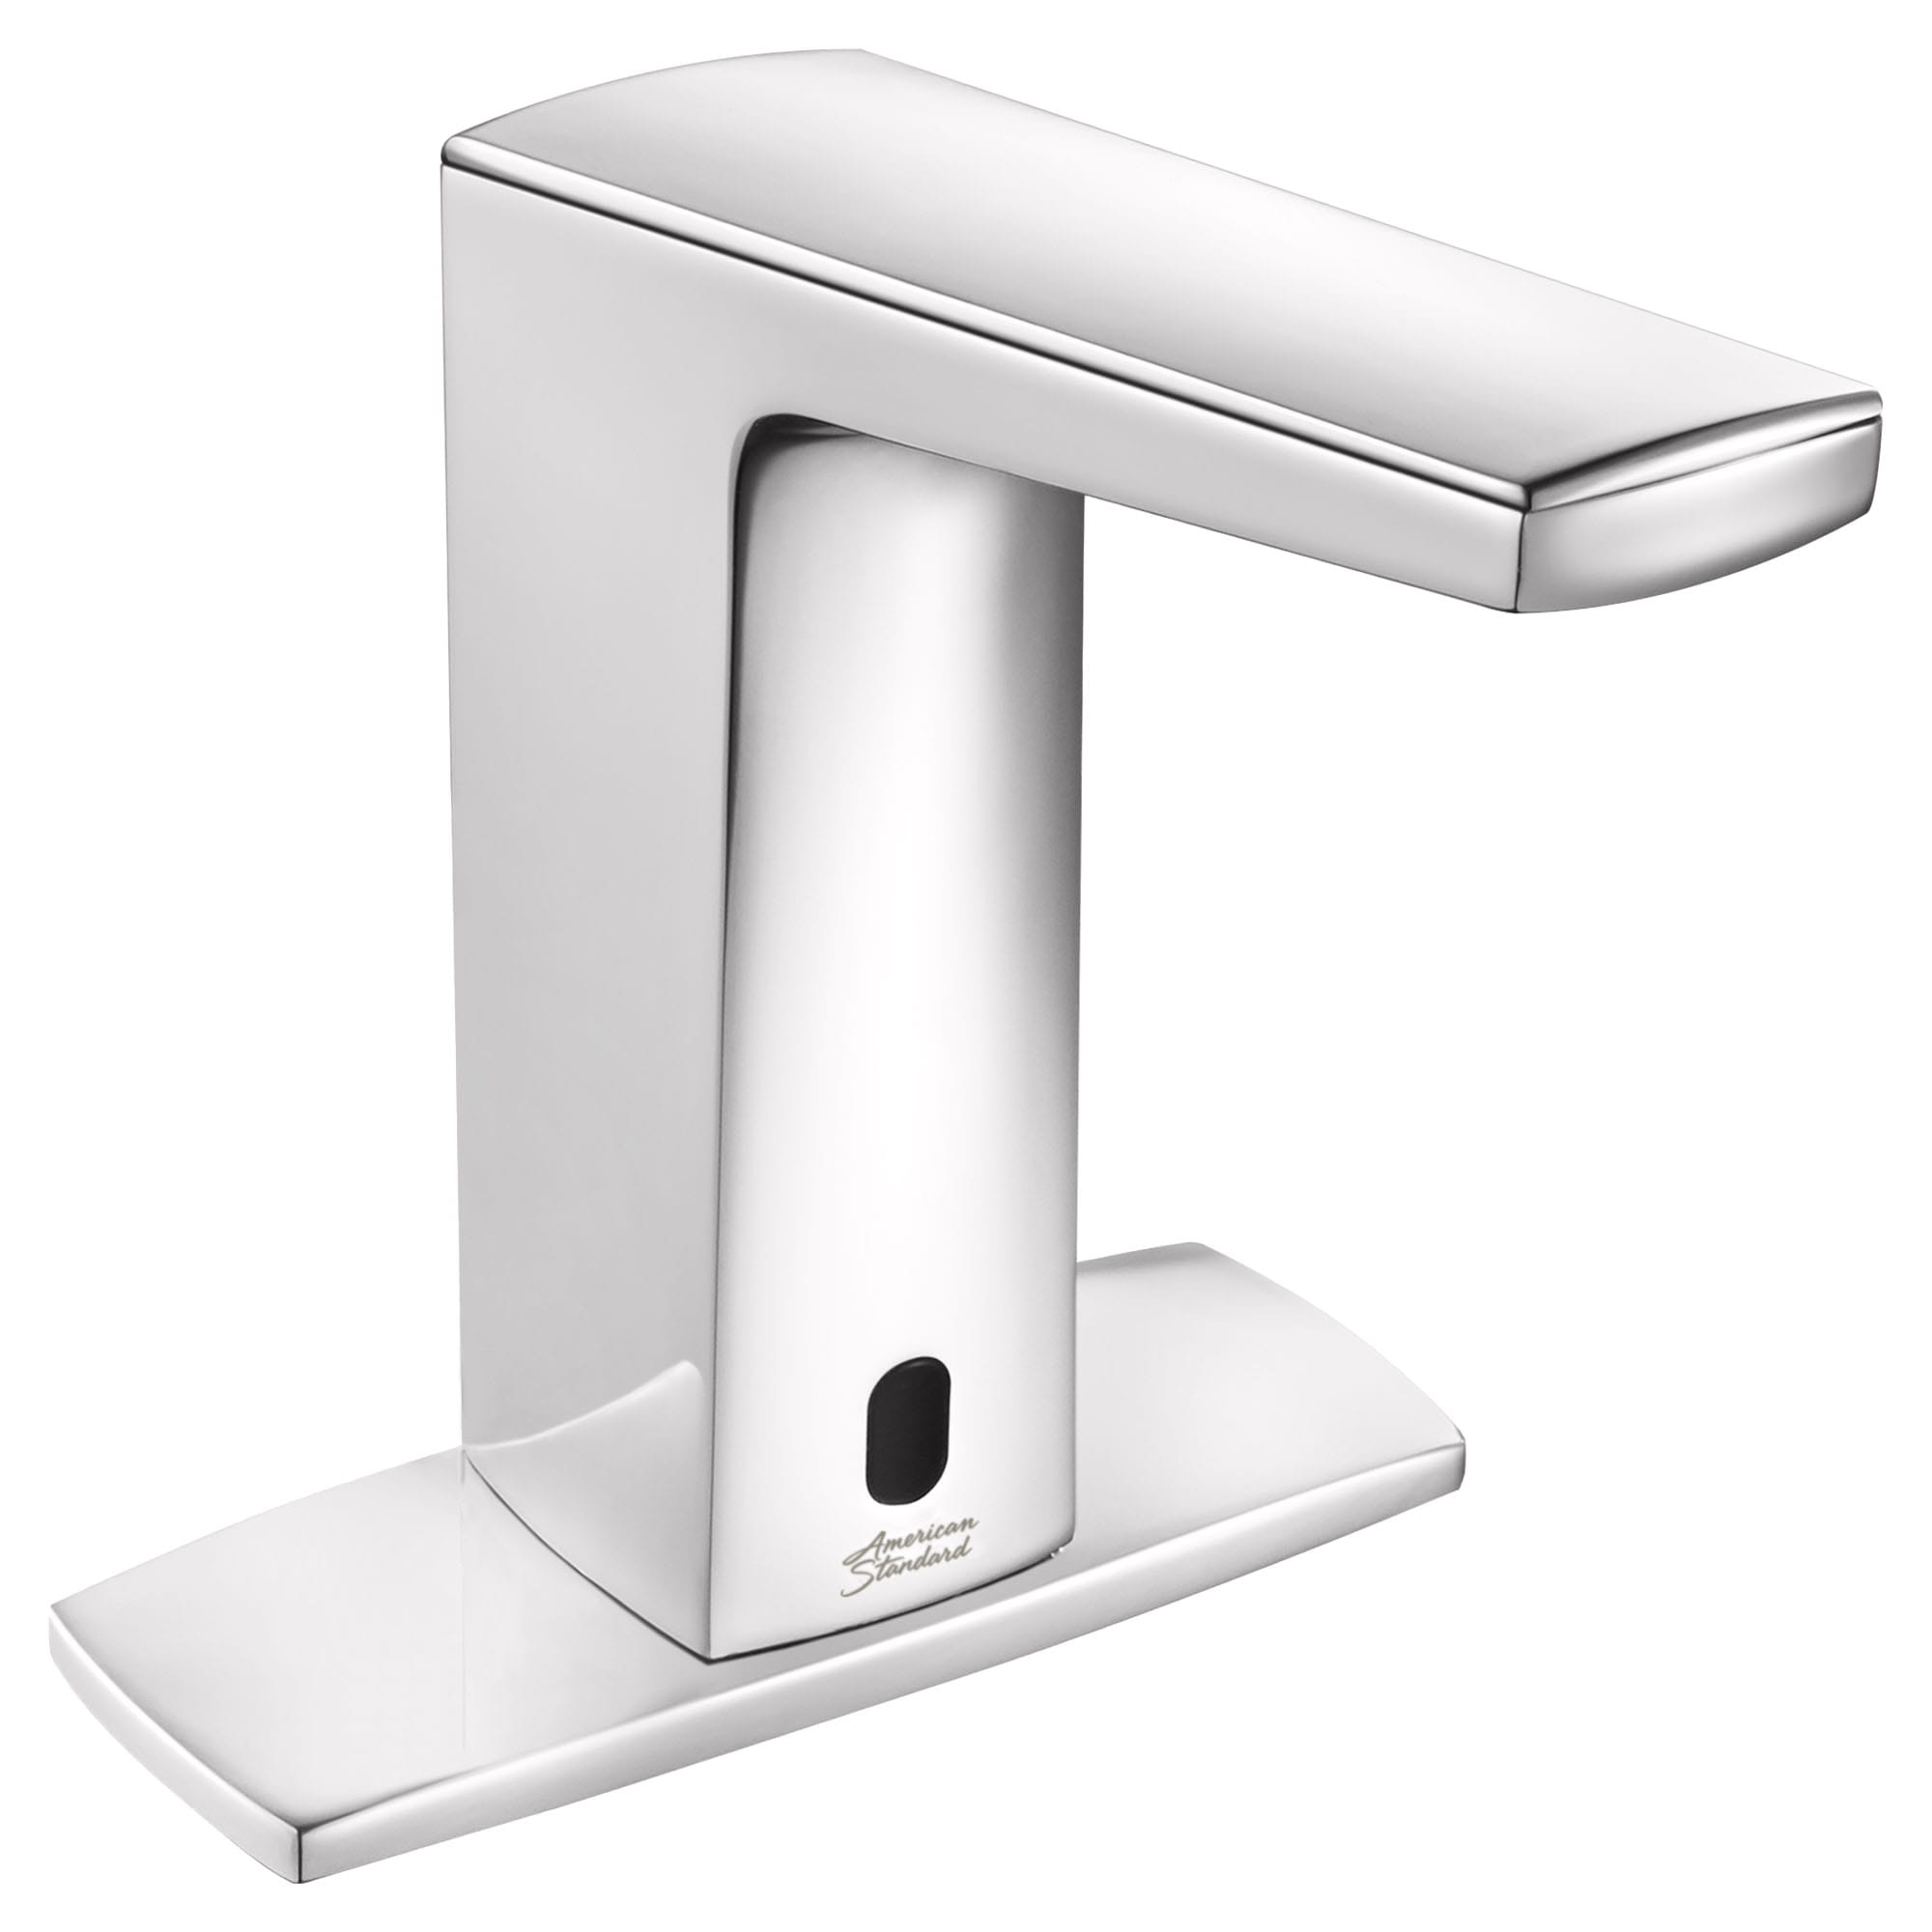 Paradigm® Selectronic® Touchless Faucet, Base Model, 0.35 gpm/1.3 Lpm